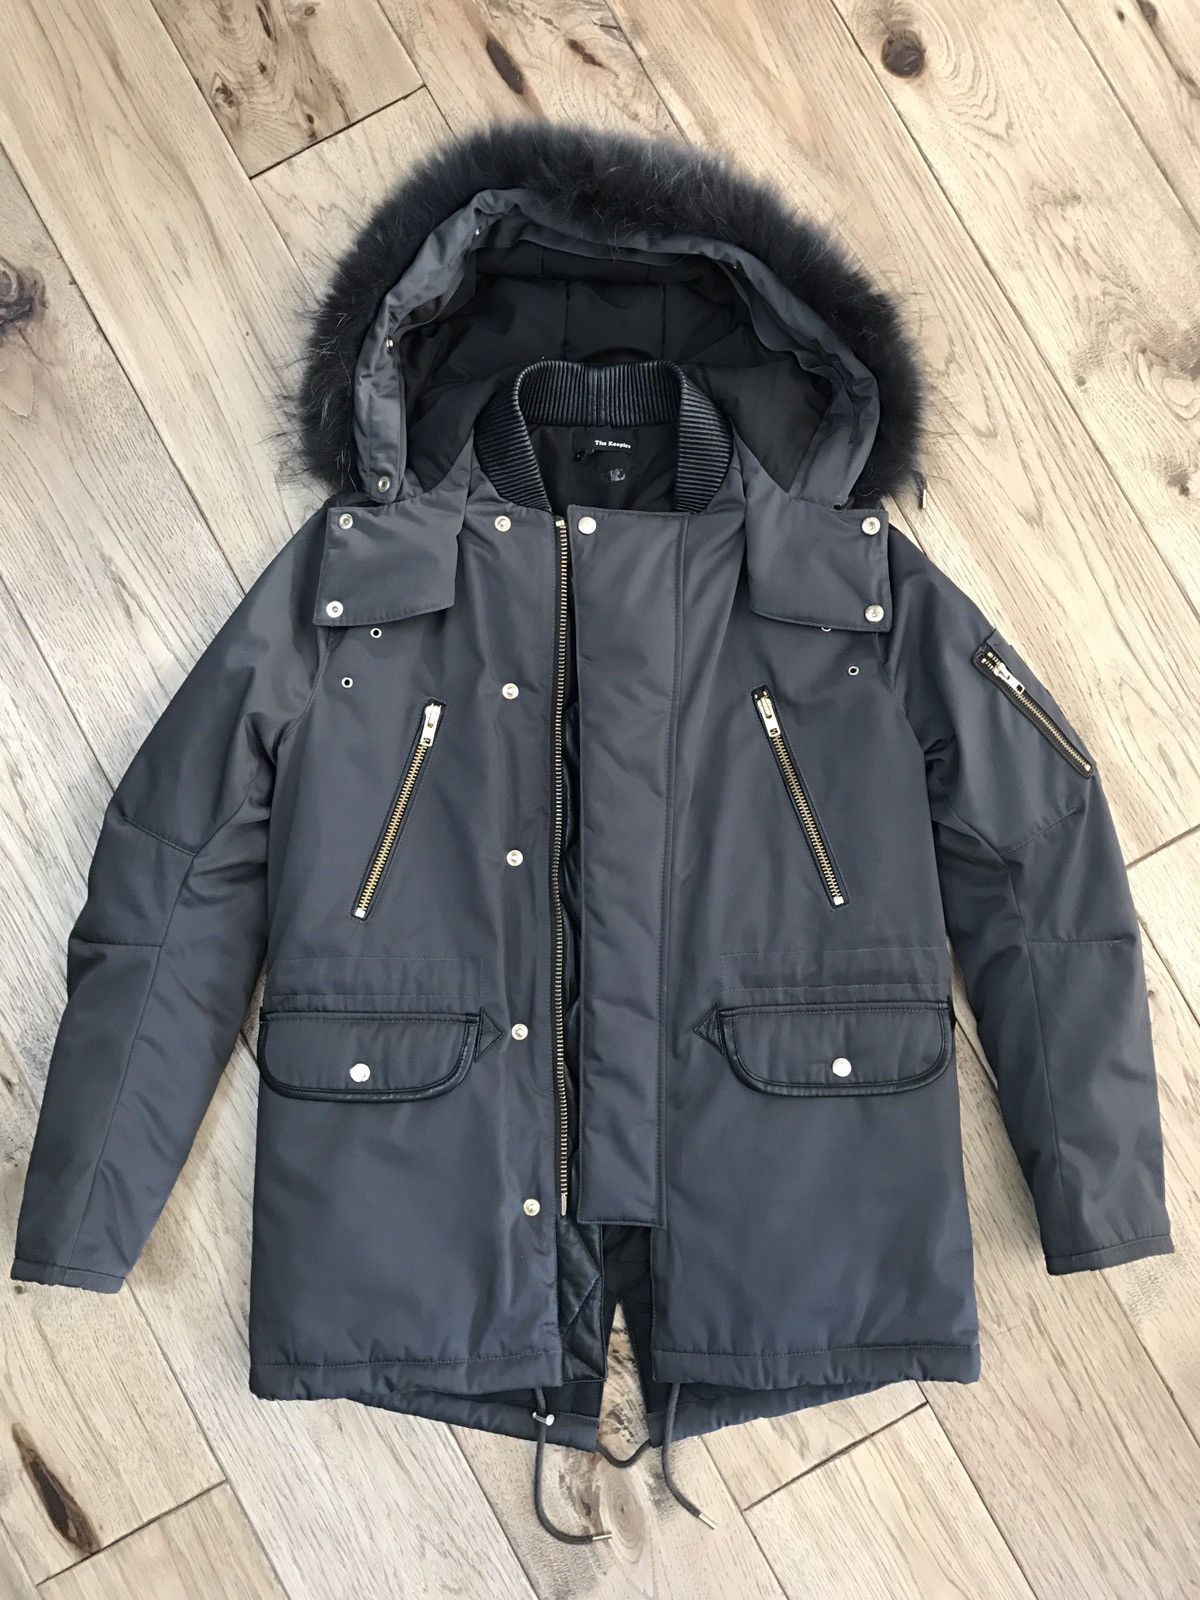 The Kooples Kenny Parka In Graphite Grailed 3672